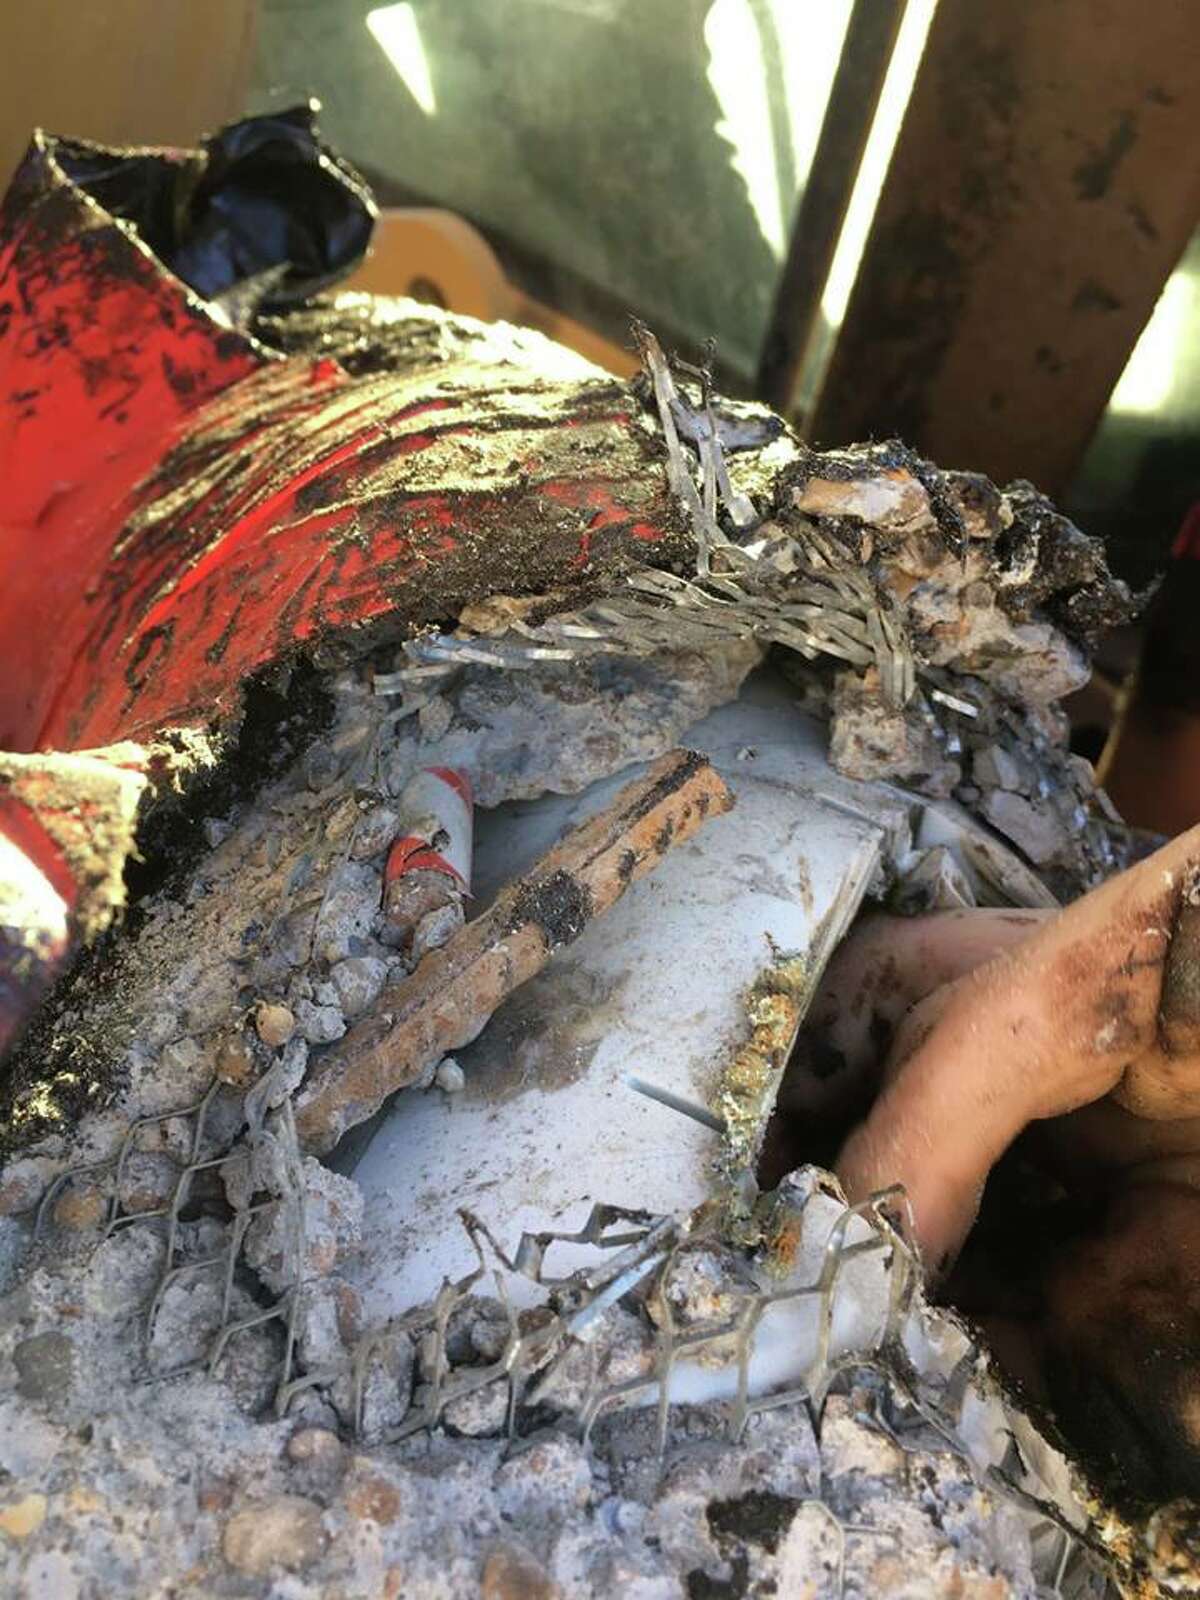 Presidio County deputies had to cut through wire mesh, rebar, concrete and plastic piping to remove a homemade cast attaching Anna Kruger, 21, to a Trans-Pecos Pipeline excavator on March 14, 2017. Courtesy of the Presidio County SheriffÂs Office